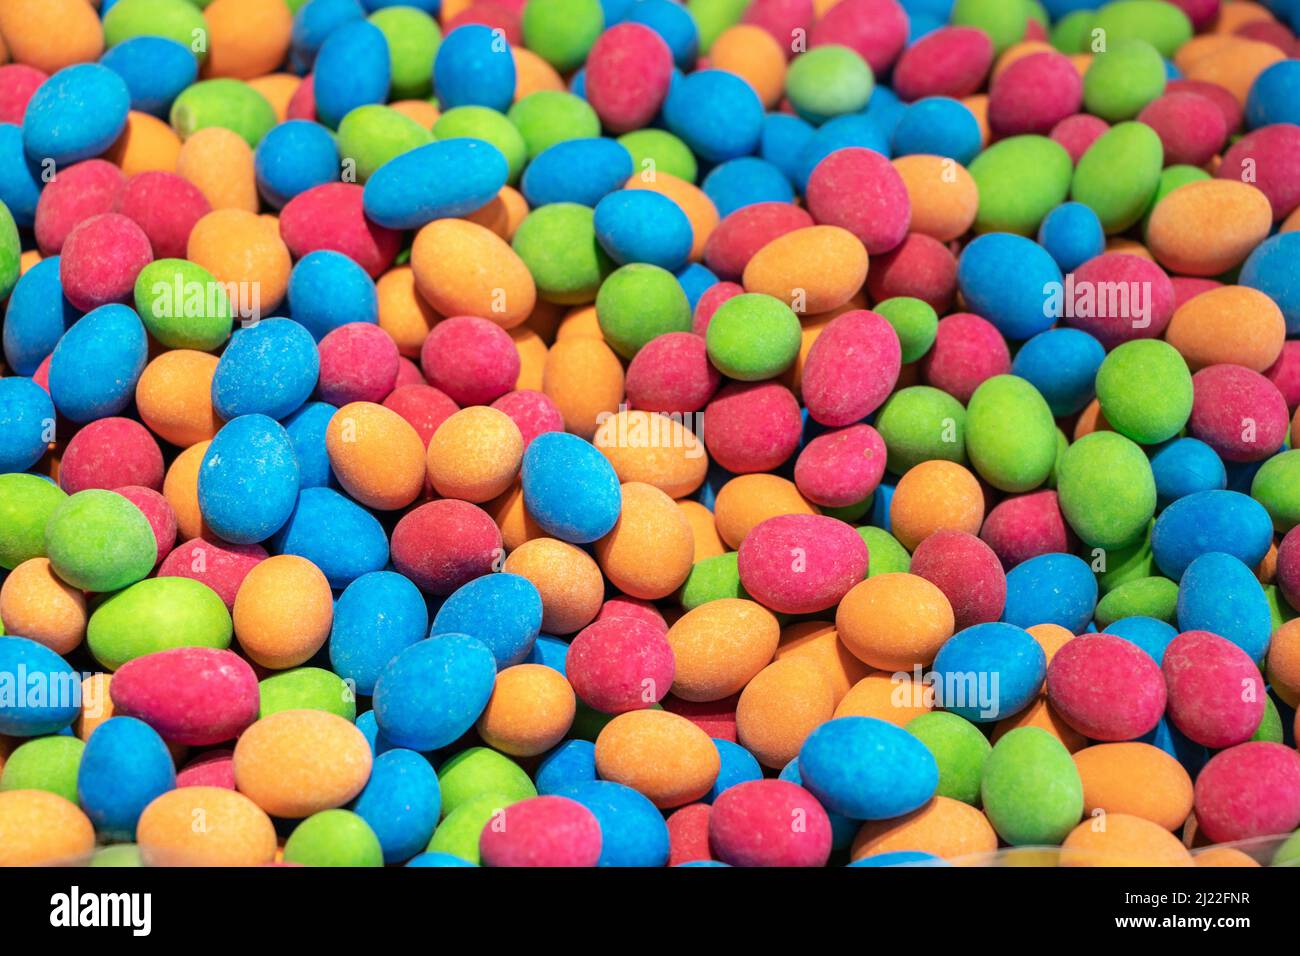 Multicolored jelly stick candies textured background. Stock Photo